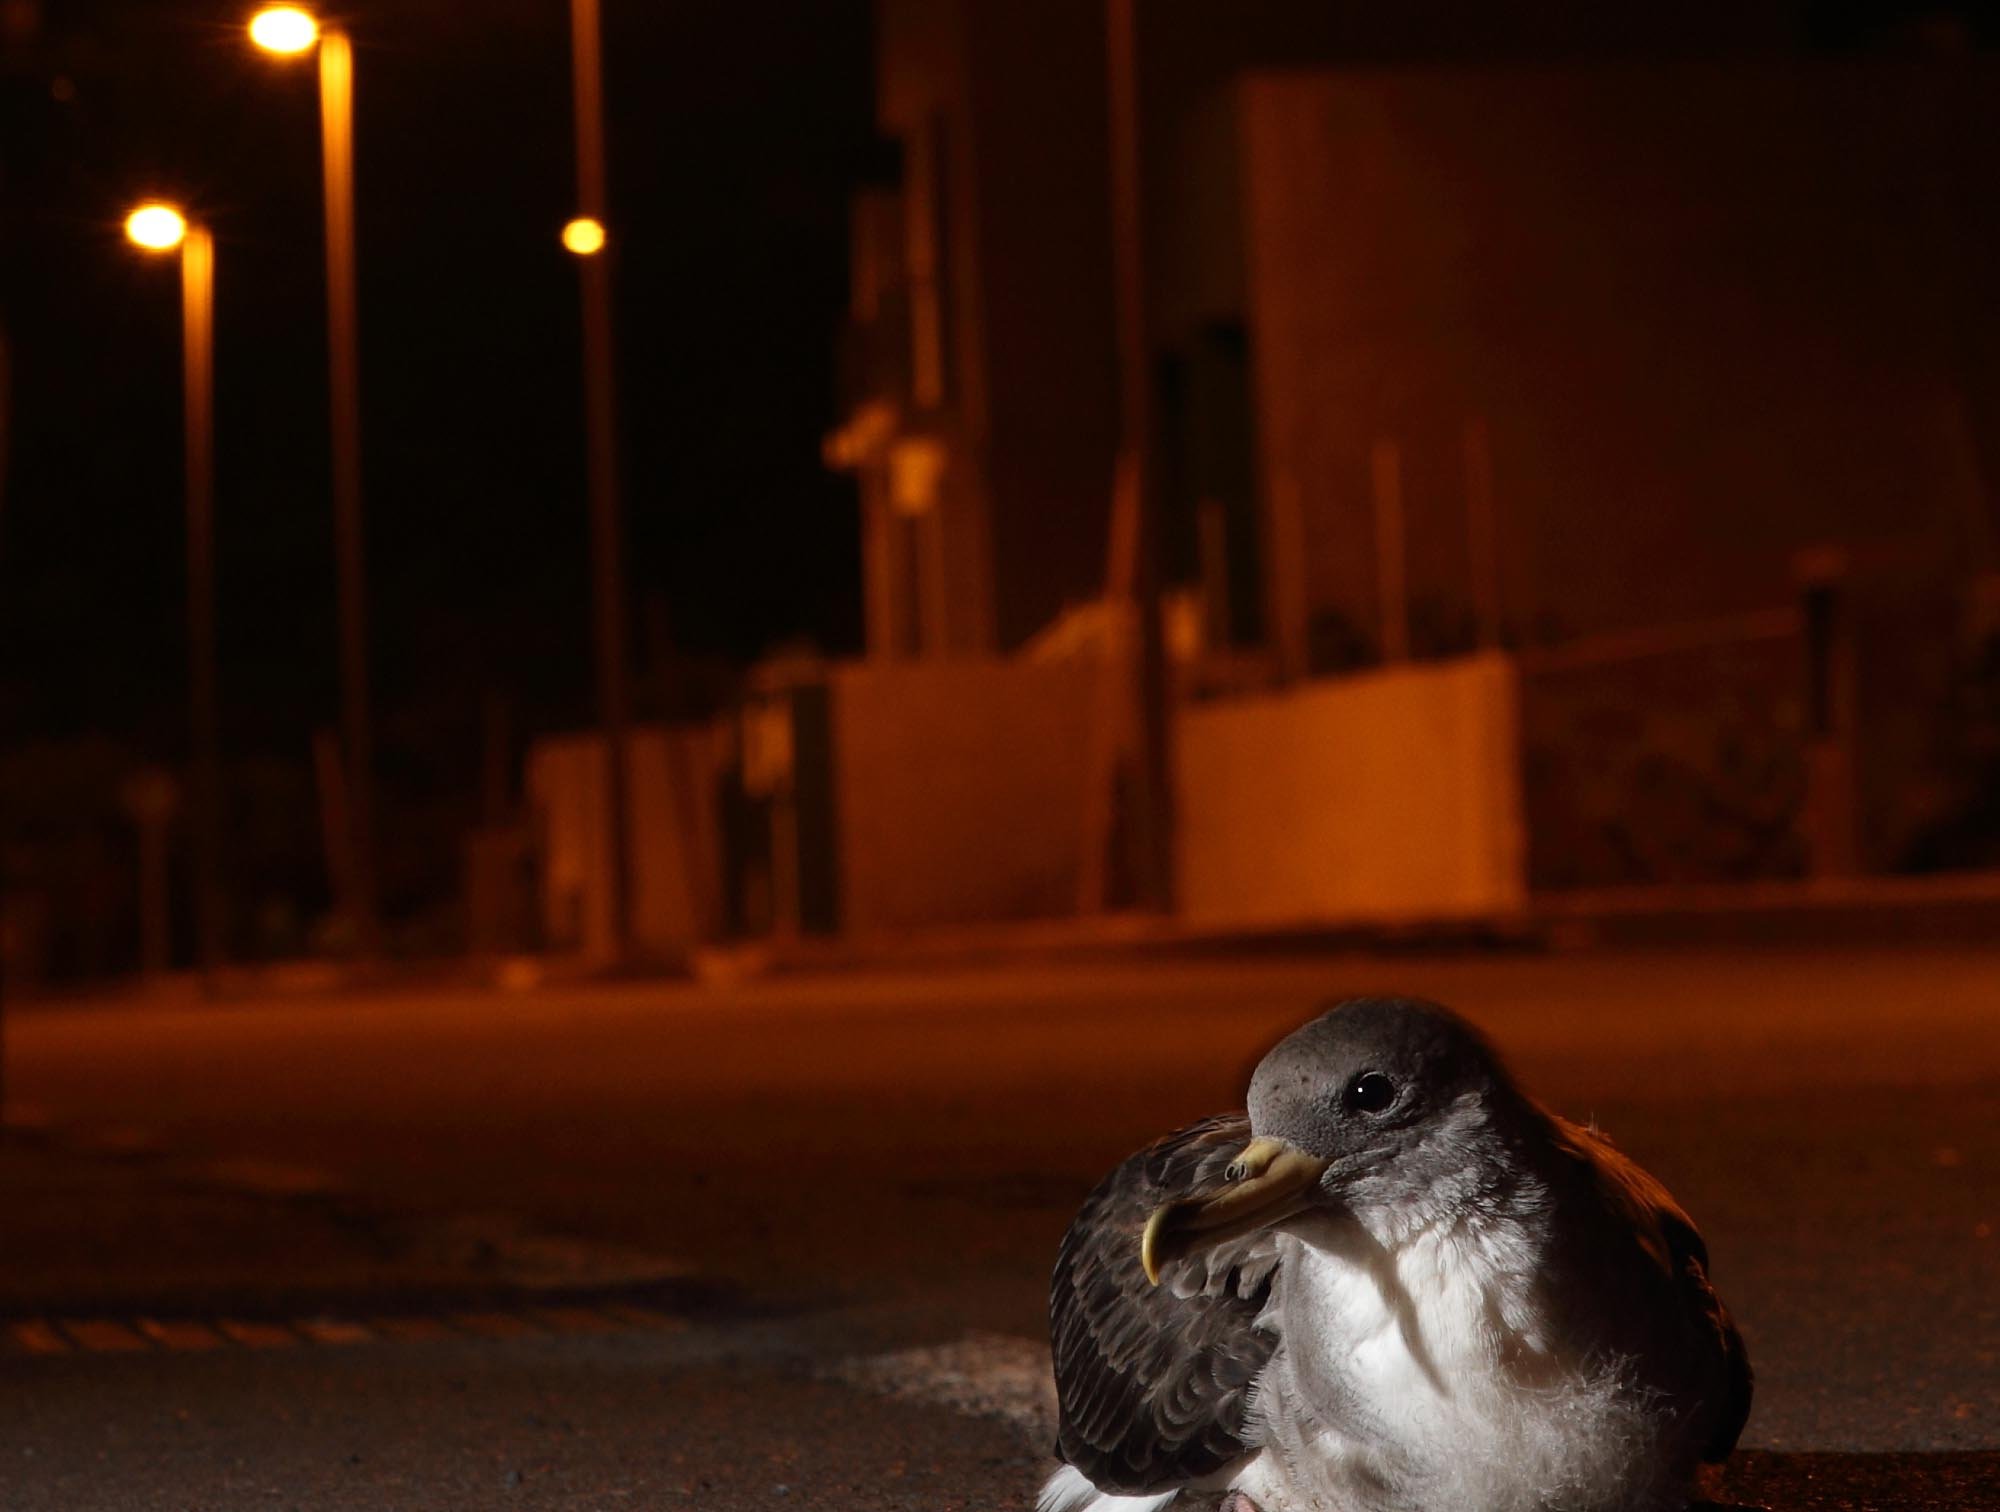 Light pollution can be problematic for animals like the Cory's shearwater.